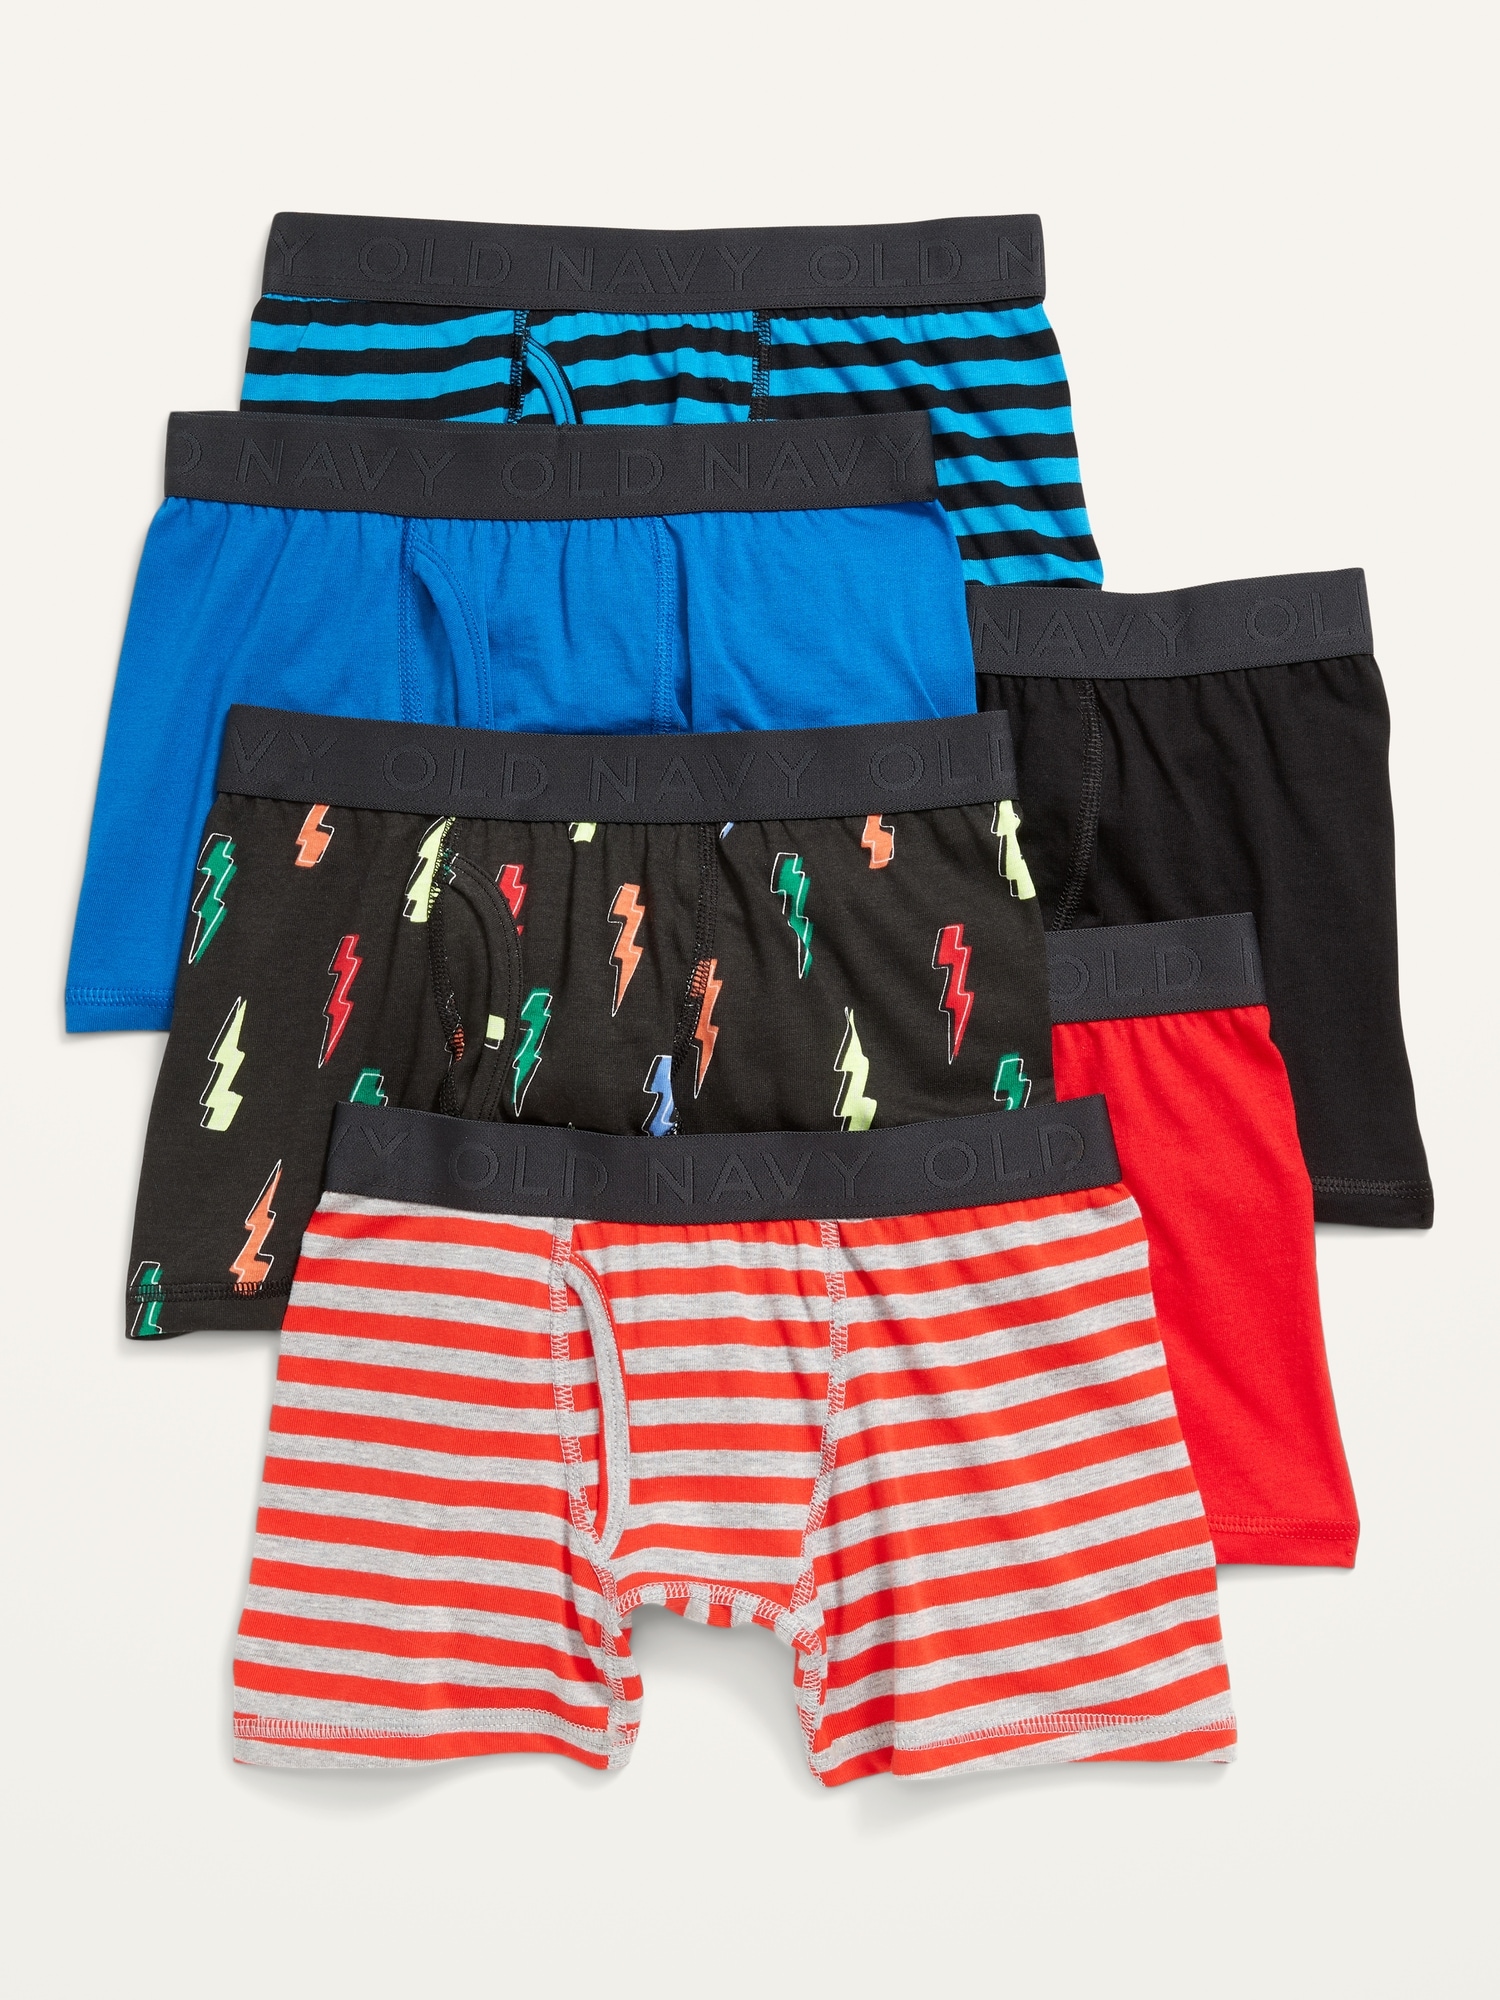 Printed Boxer-Briefs Underwear 7-Pack for Boys - Old Navy Philippines